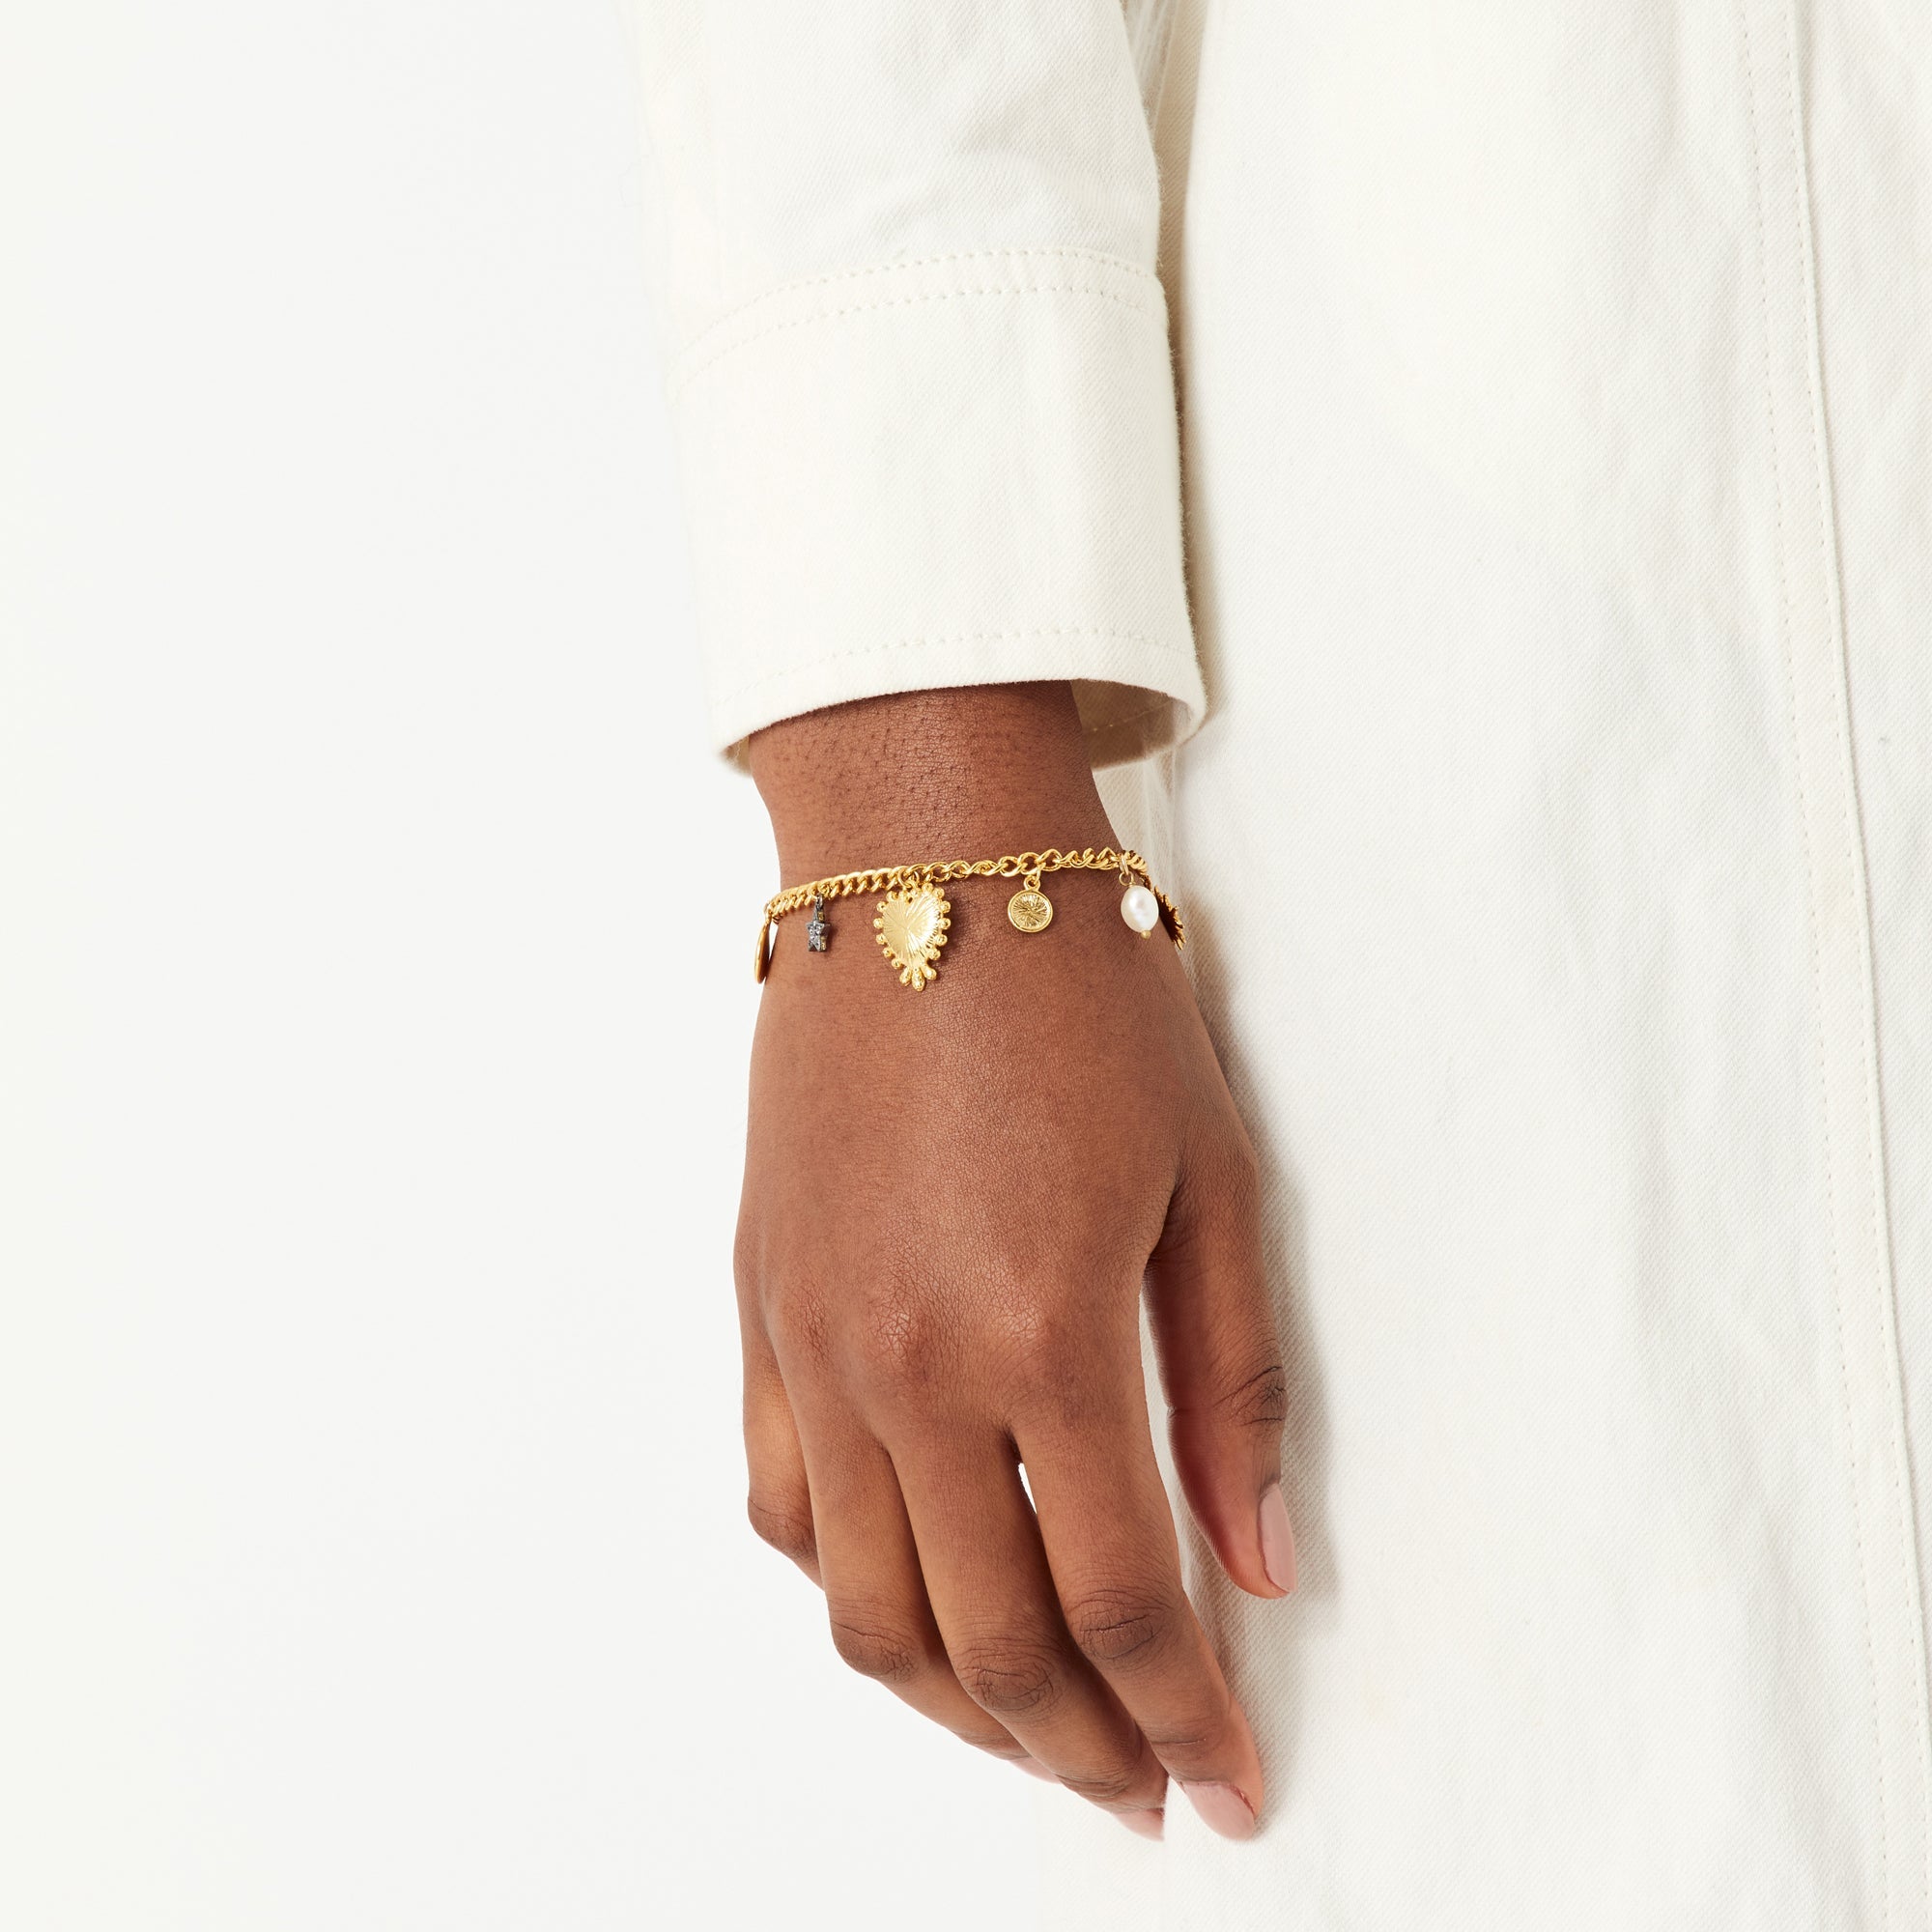 Real Gold Plated Z Grecian Charm Bracelet For Women By Accessorize London